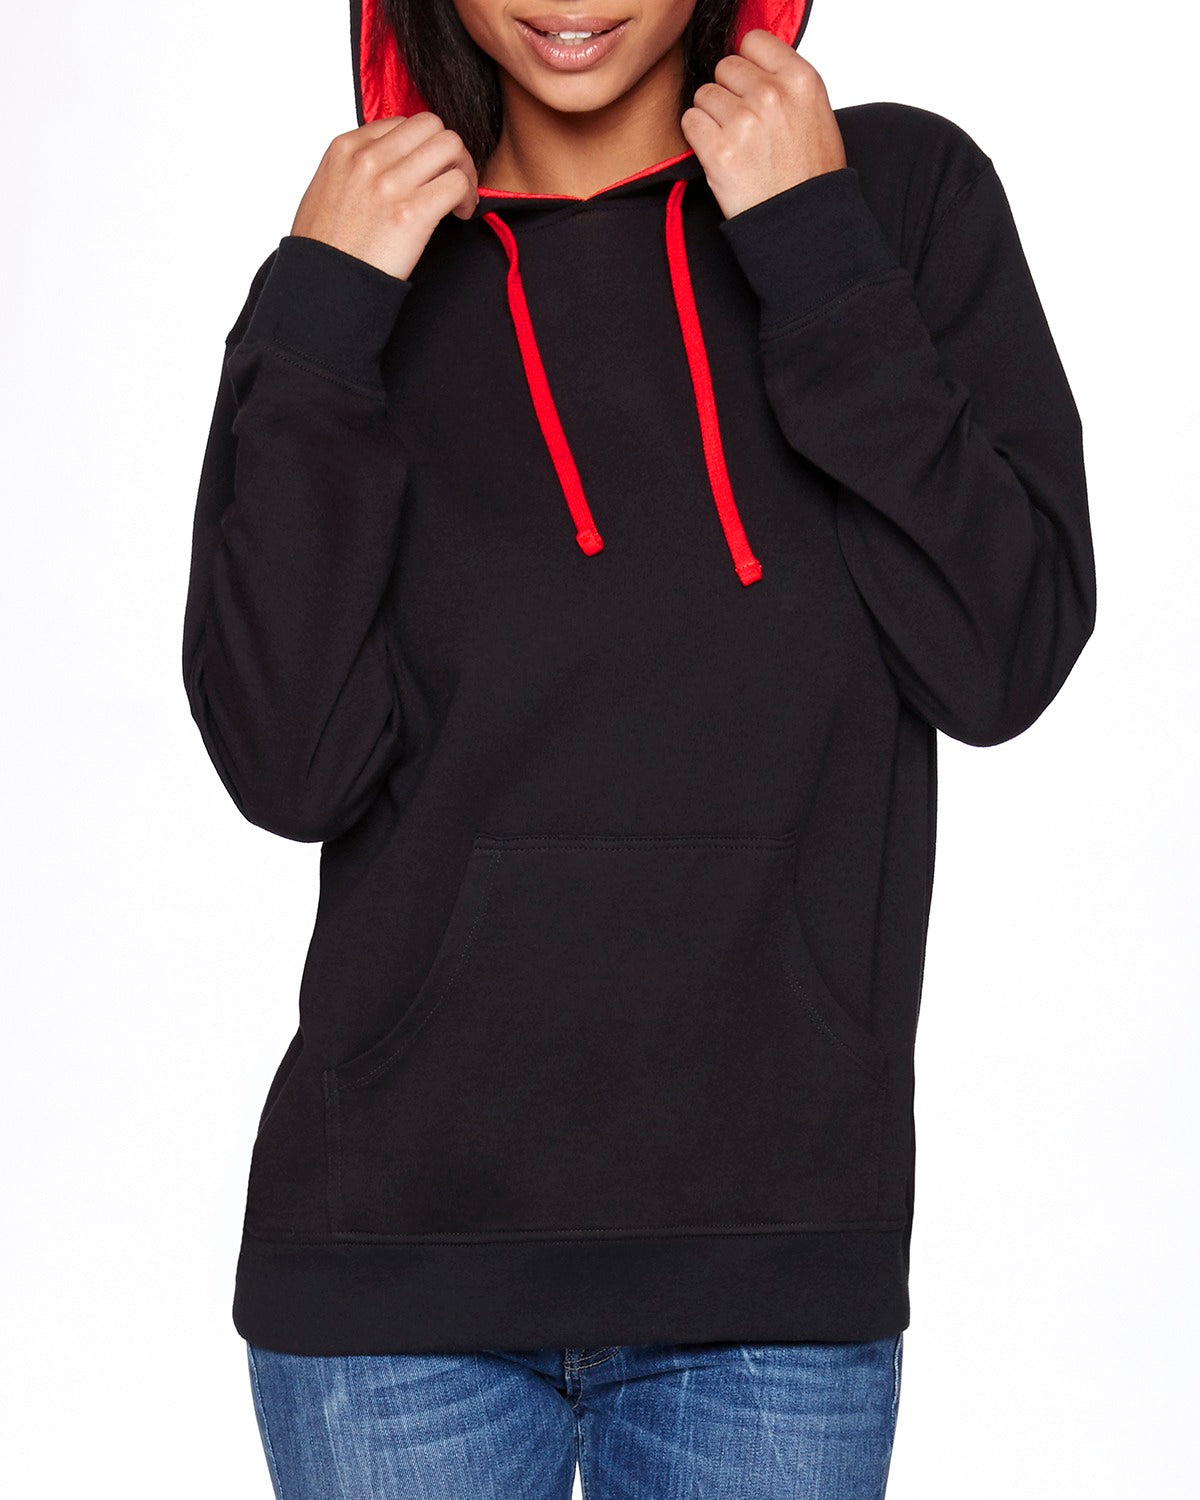 Unisex French Terry Hoody